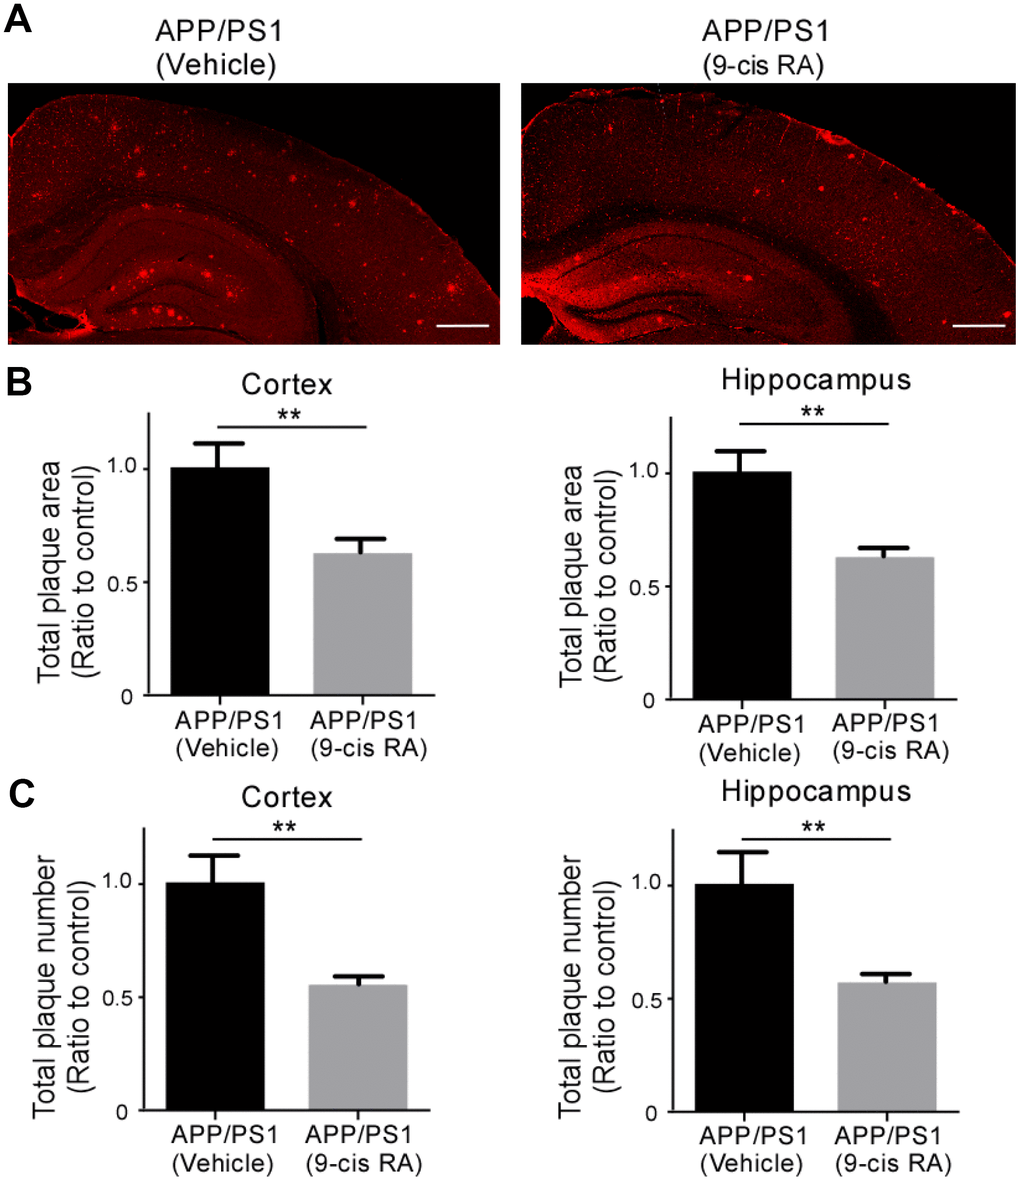 Treatment with 9-cis RA reduced the level of Αβ deposition in APP/PS1 mice compared with vehicle-treated control mice. (A) Representative images of Αβ staining in the frontal cortex and hippocampus of APP/PS1 mice treated with vehicle as a control (left) or 9-cis RA (right). Scale bars, 500 μm. (B) Stereological quantification of the Αβ volume in the cortex (left) and hippocampus (right). (C) Stereological quantification of the Αβ numbers in the cortex (left) and hippocampus (right). Values from multiple images of each section that cover most of the region of study were averaged per animal per experiment. Data represent the mean ± SEM (n=6). **, p